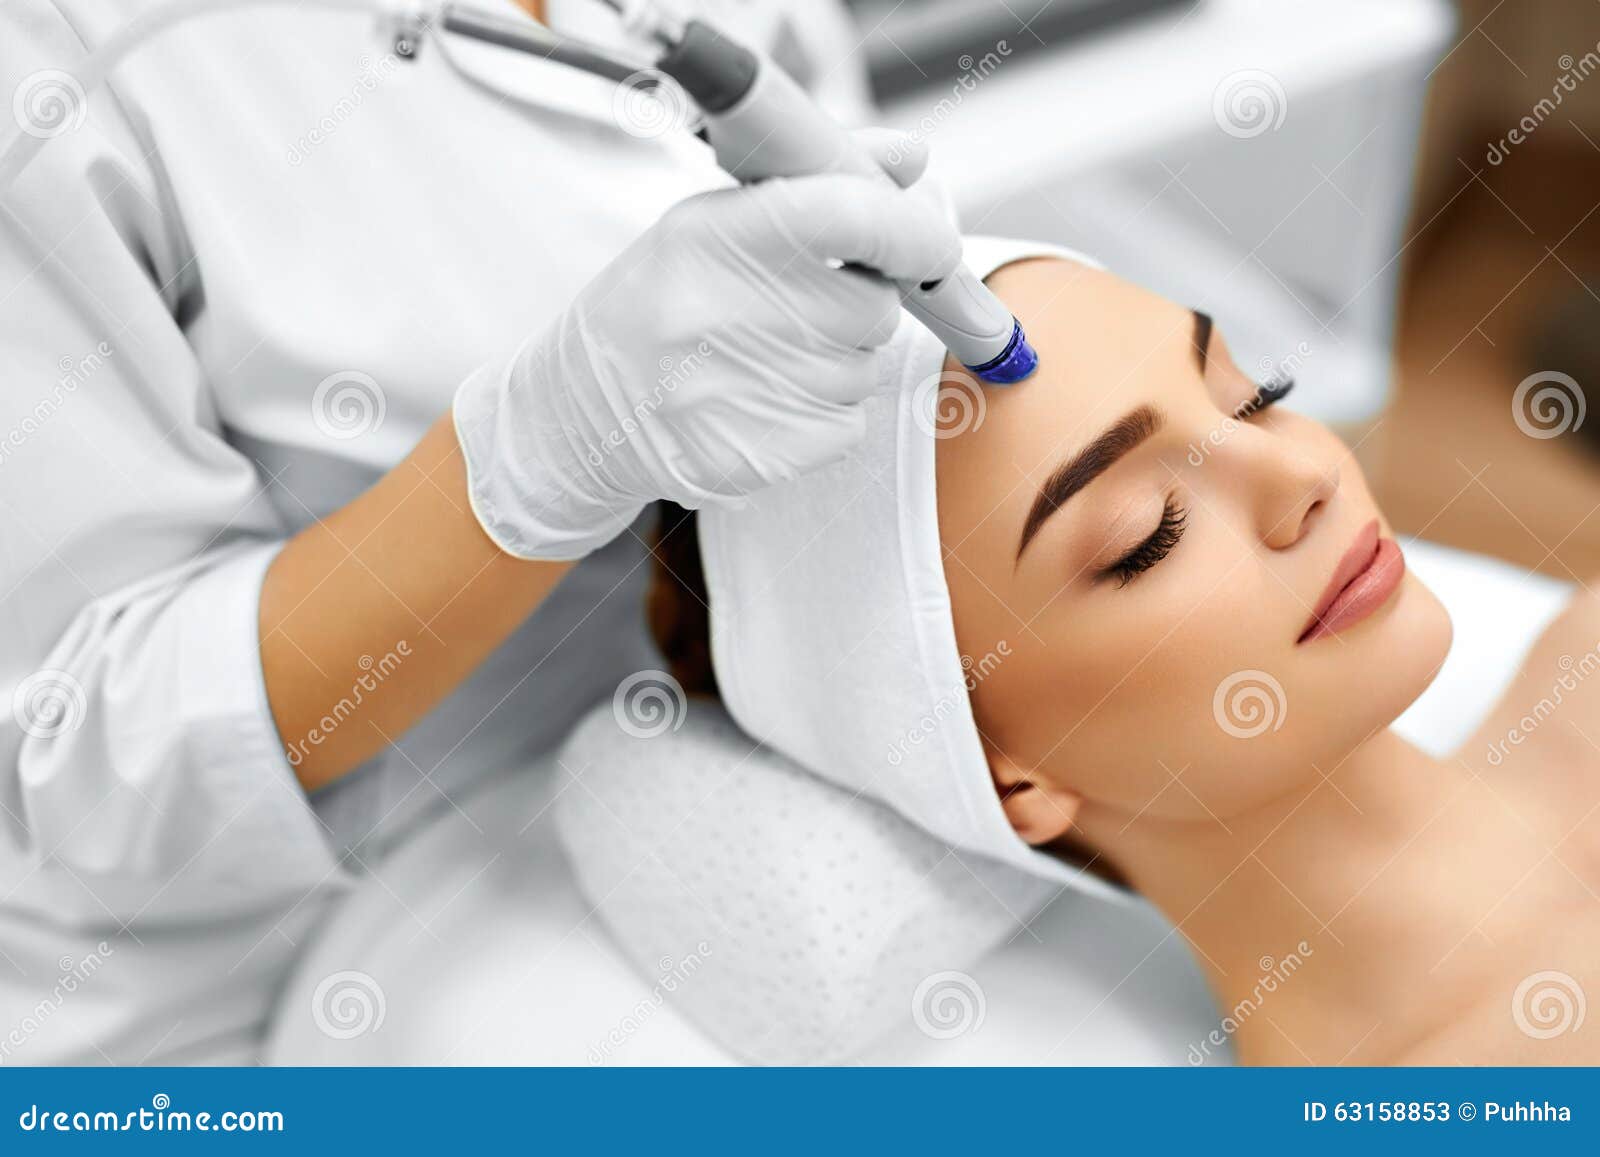 face skin care. facial hydro microdermabrasion peeling treatment